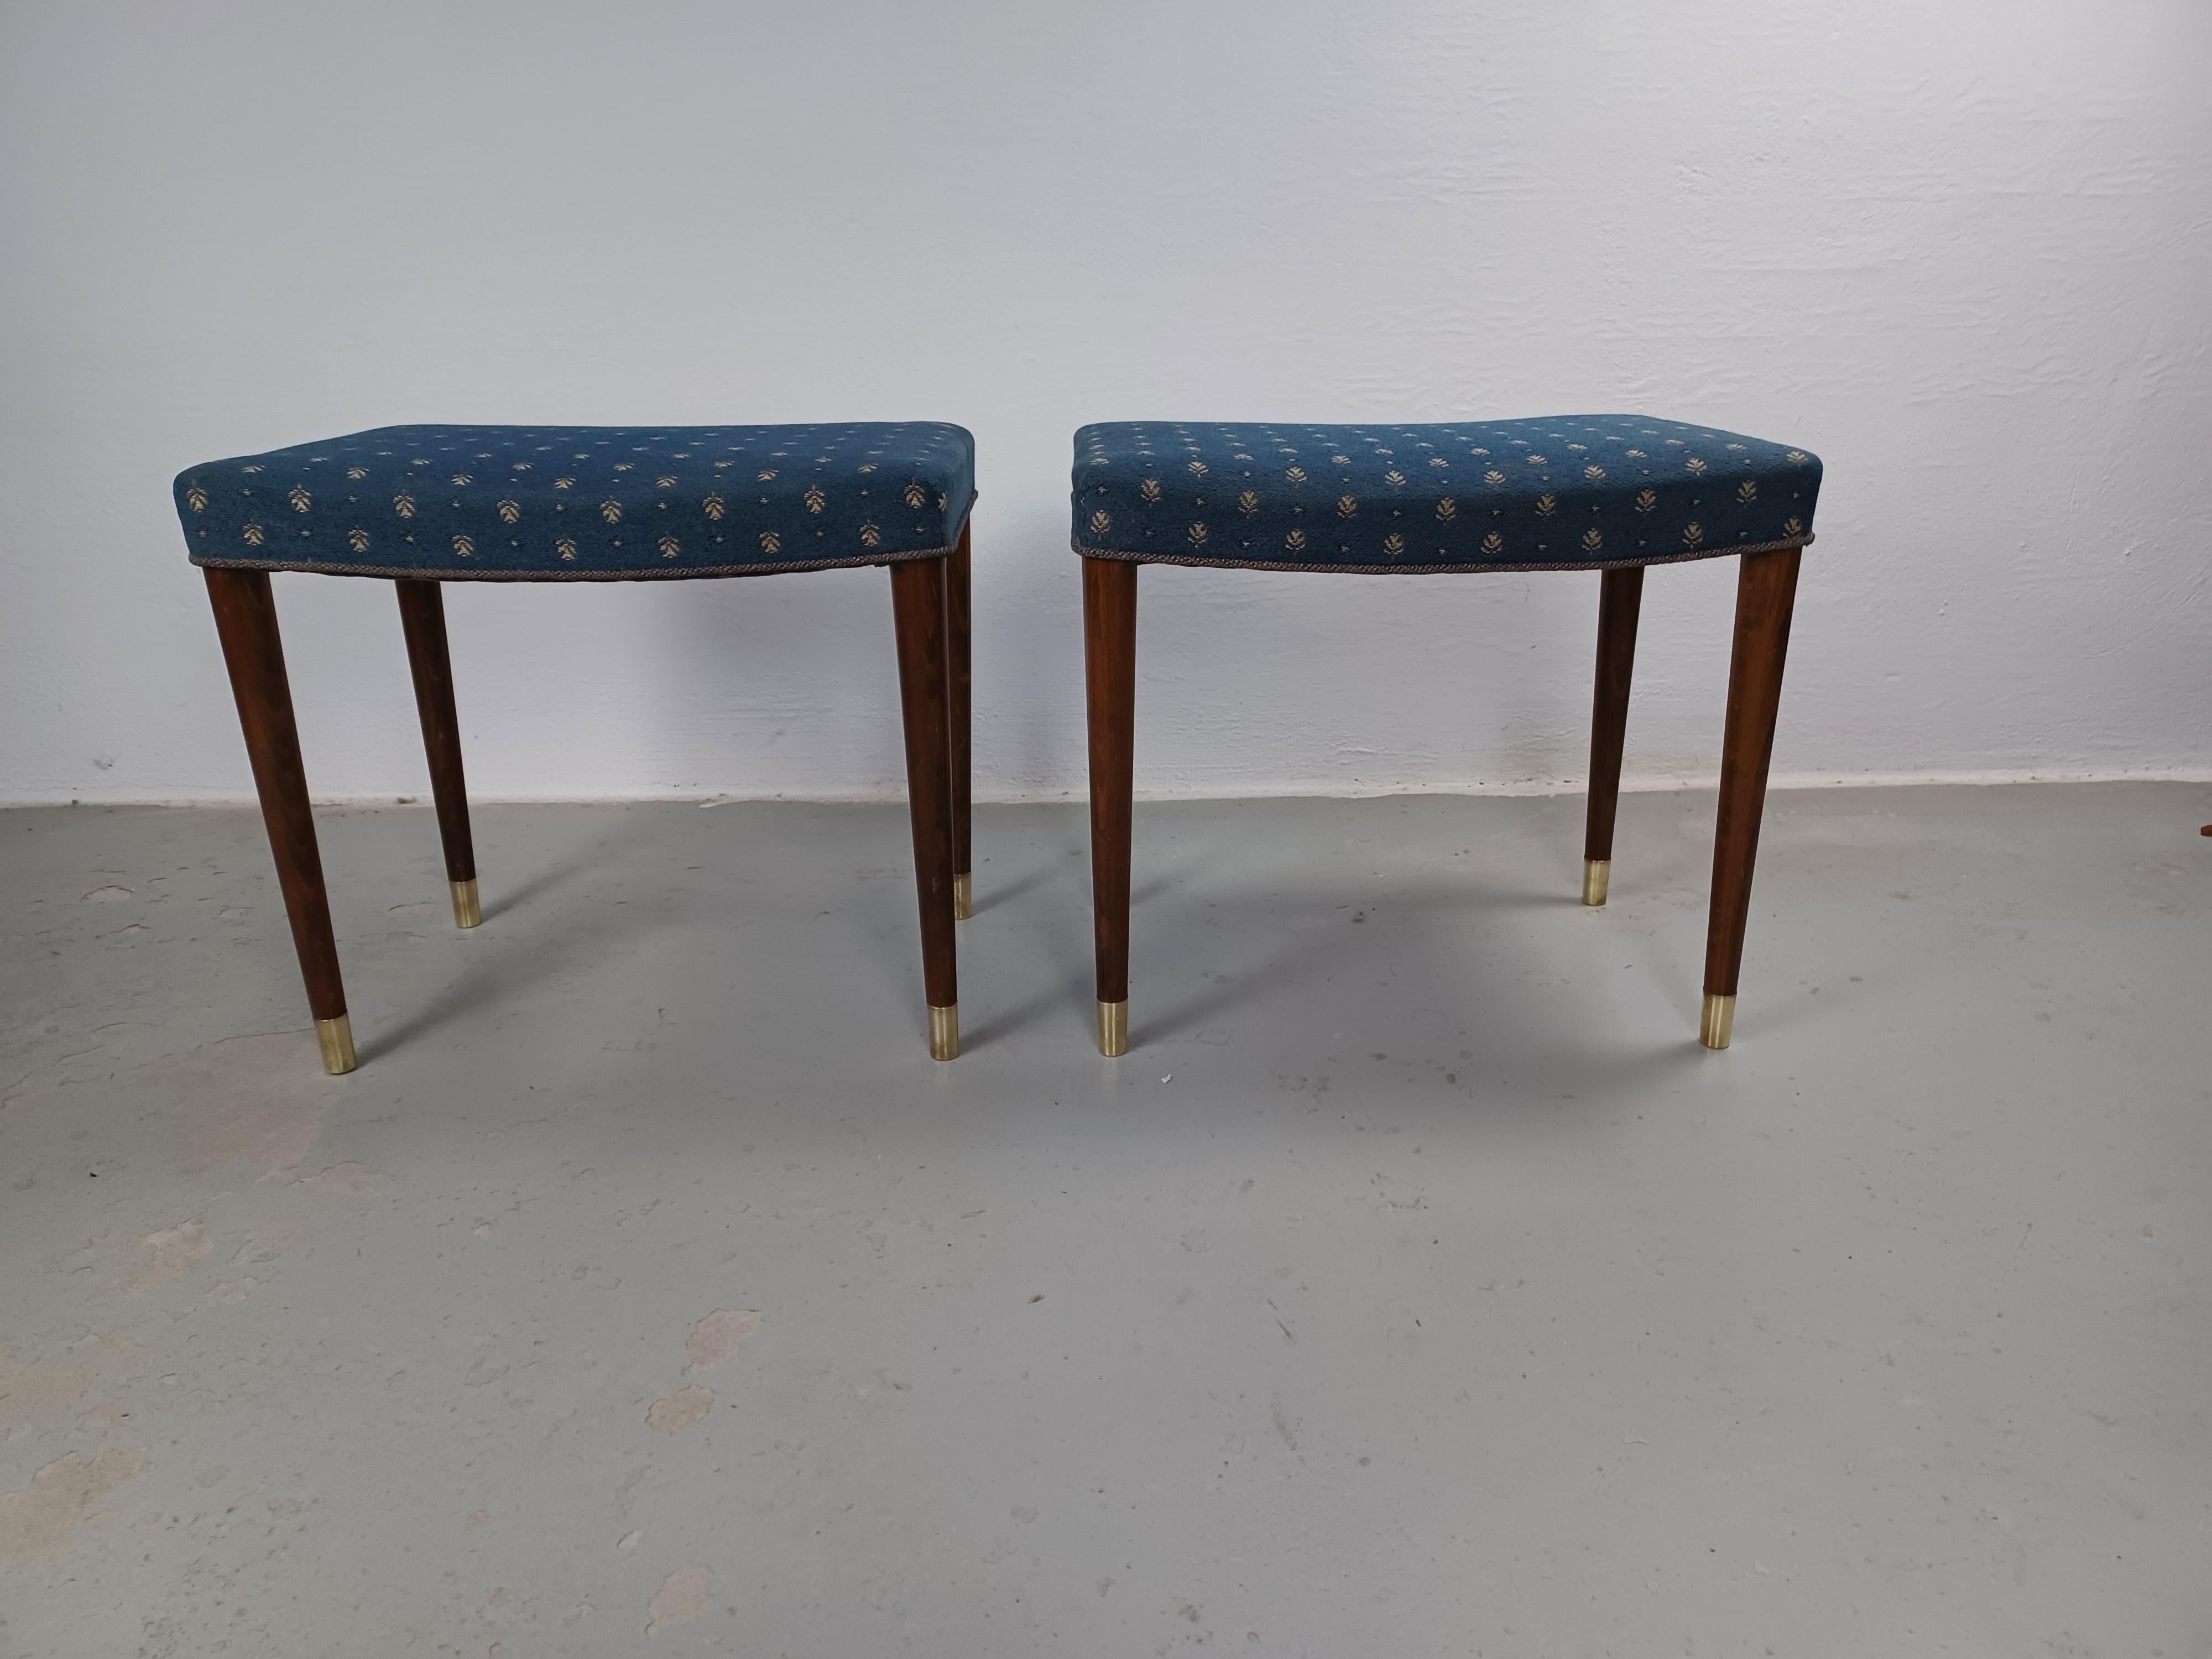 1930s Restored Danish Robert Rasmussen Art Deco Stools or Footstools 

Rare set of two Art Deco stools from the 1920s / 1930s with tanned beech legs, solid brass shoes and original upholstery in very good condirion on a well designed slightly curved